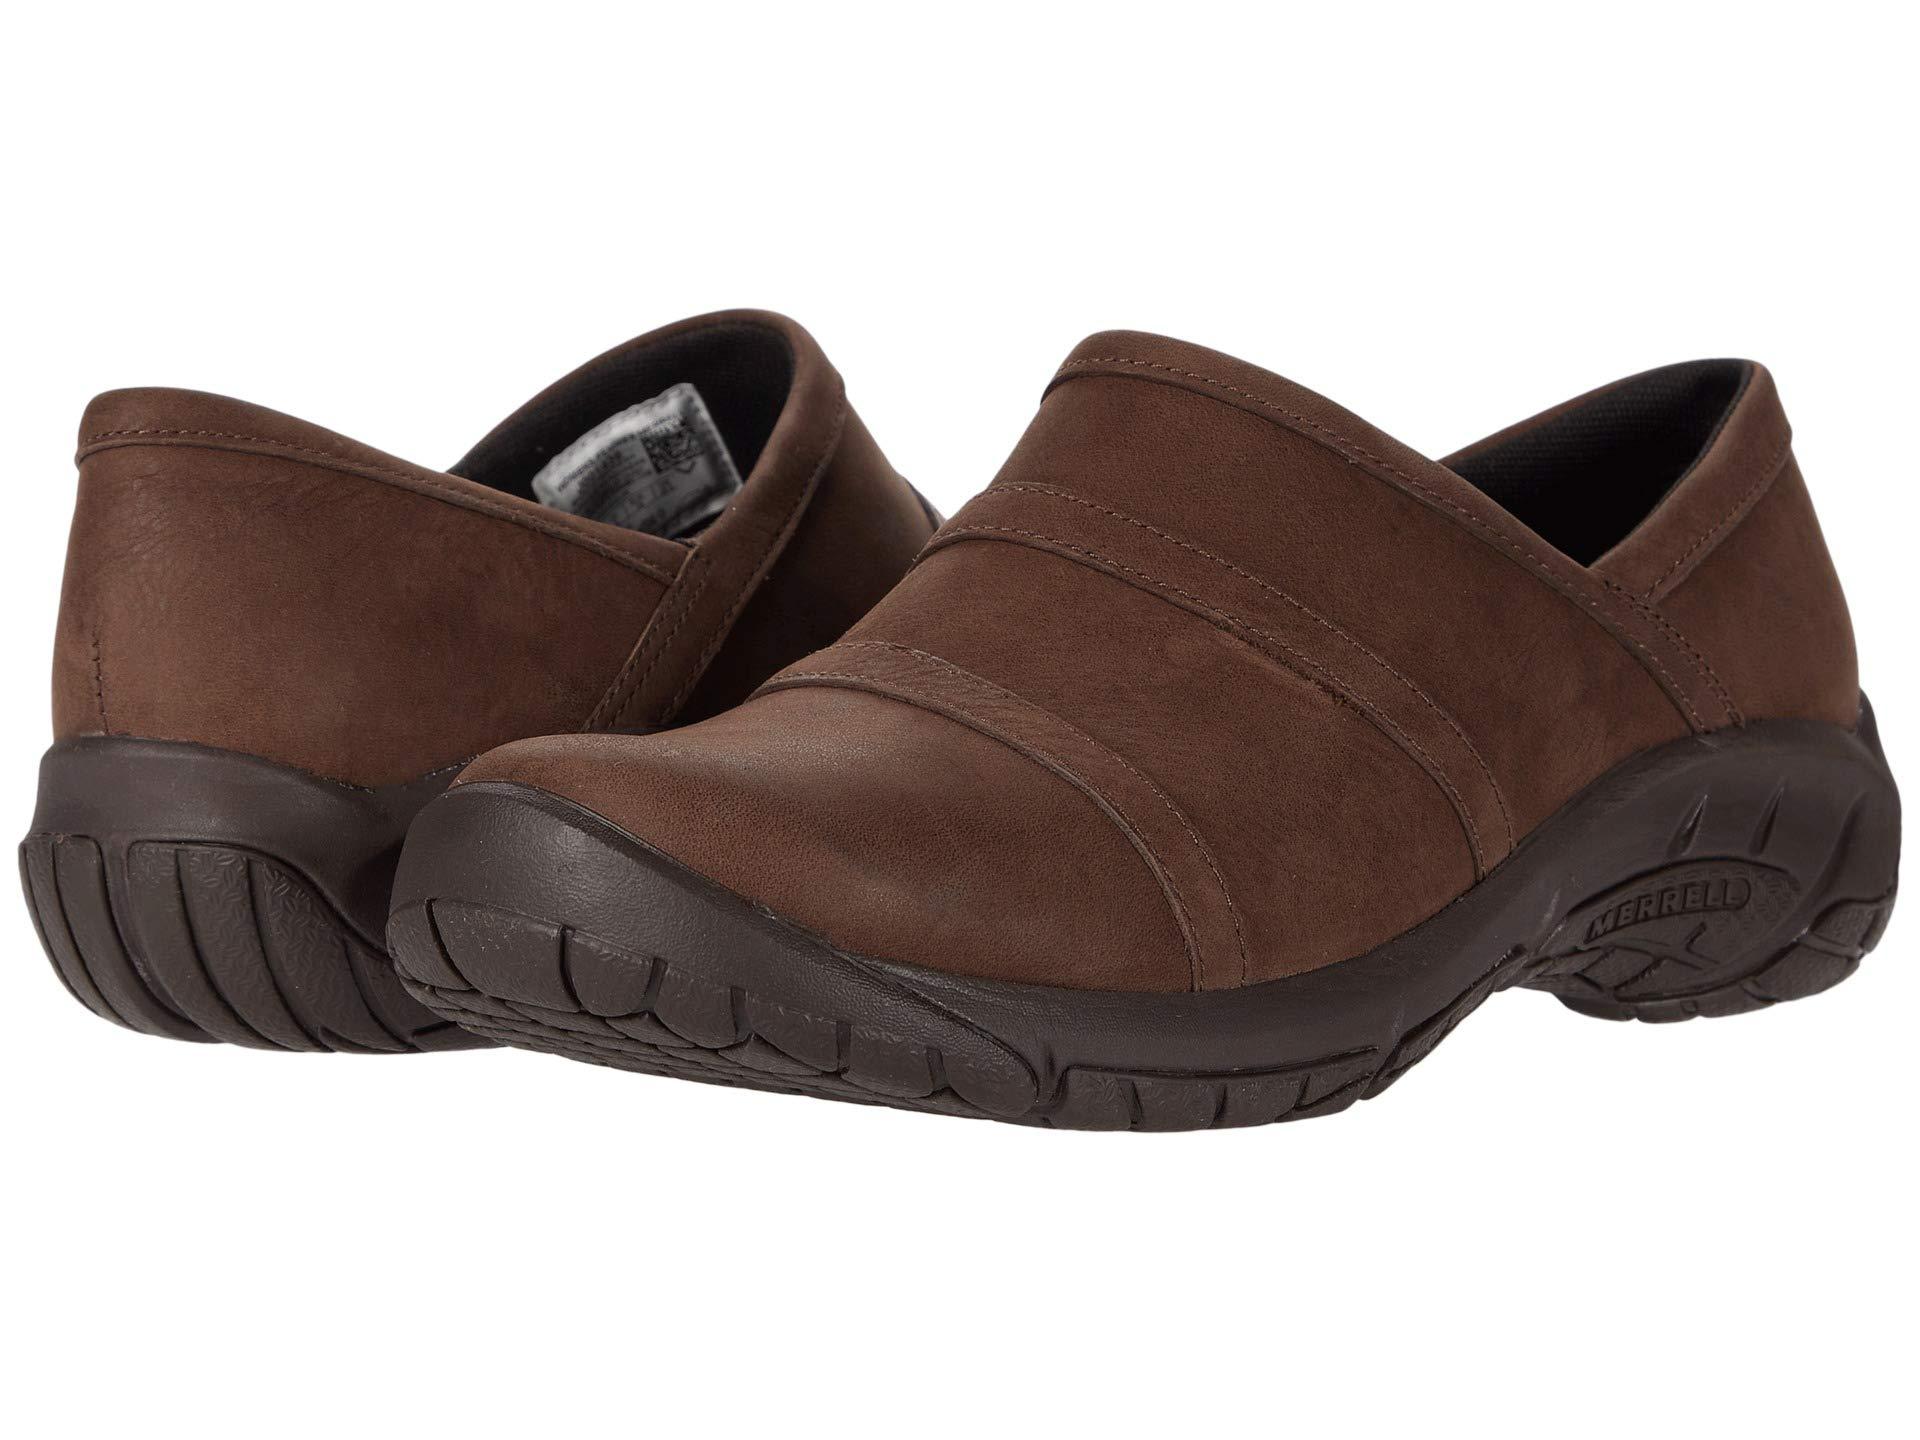 Merrell Encore Moc 4 Leather in Brown - Lyst